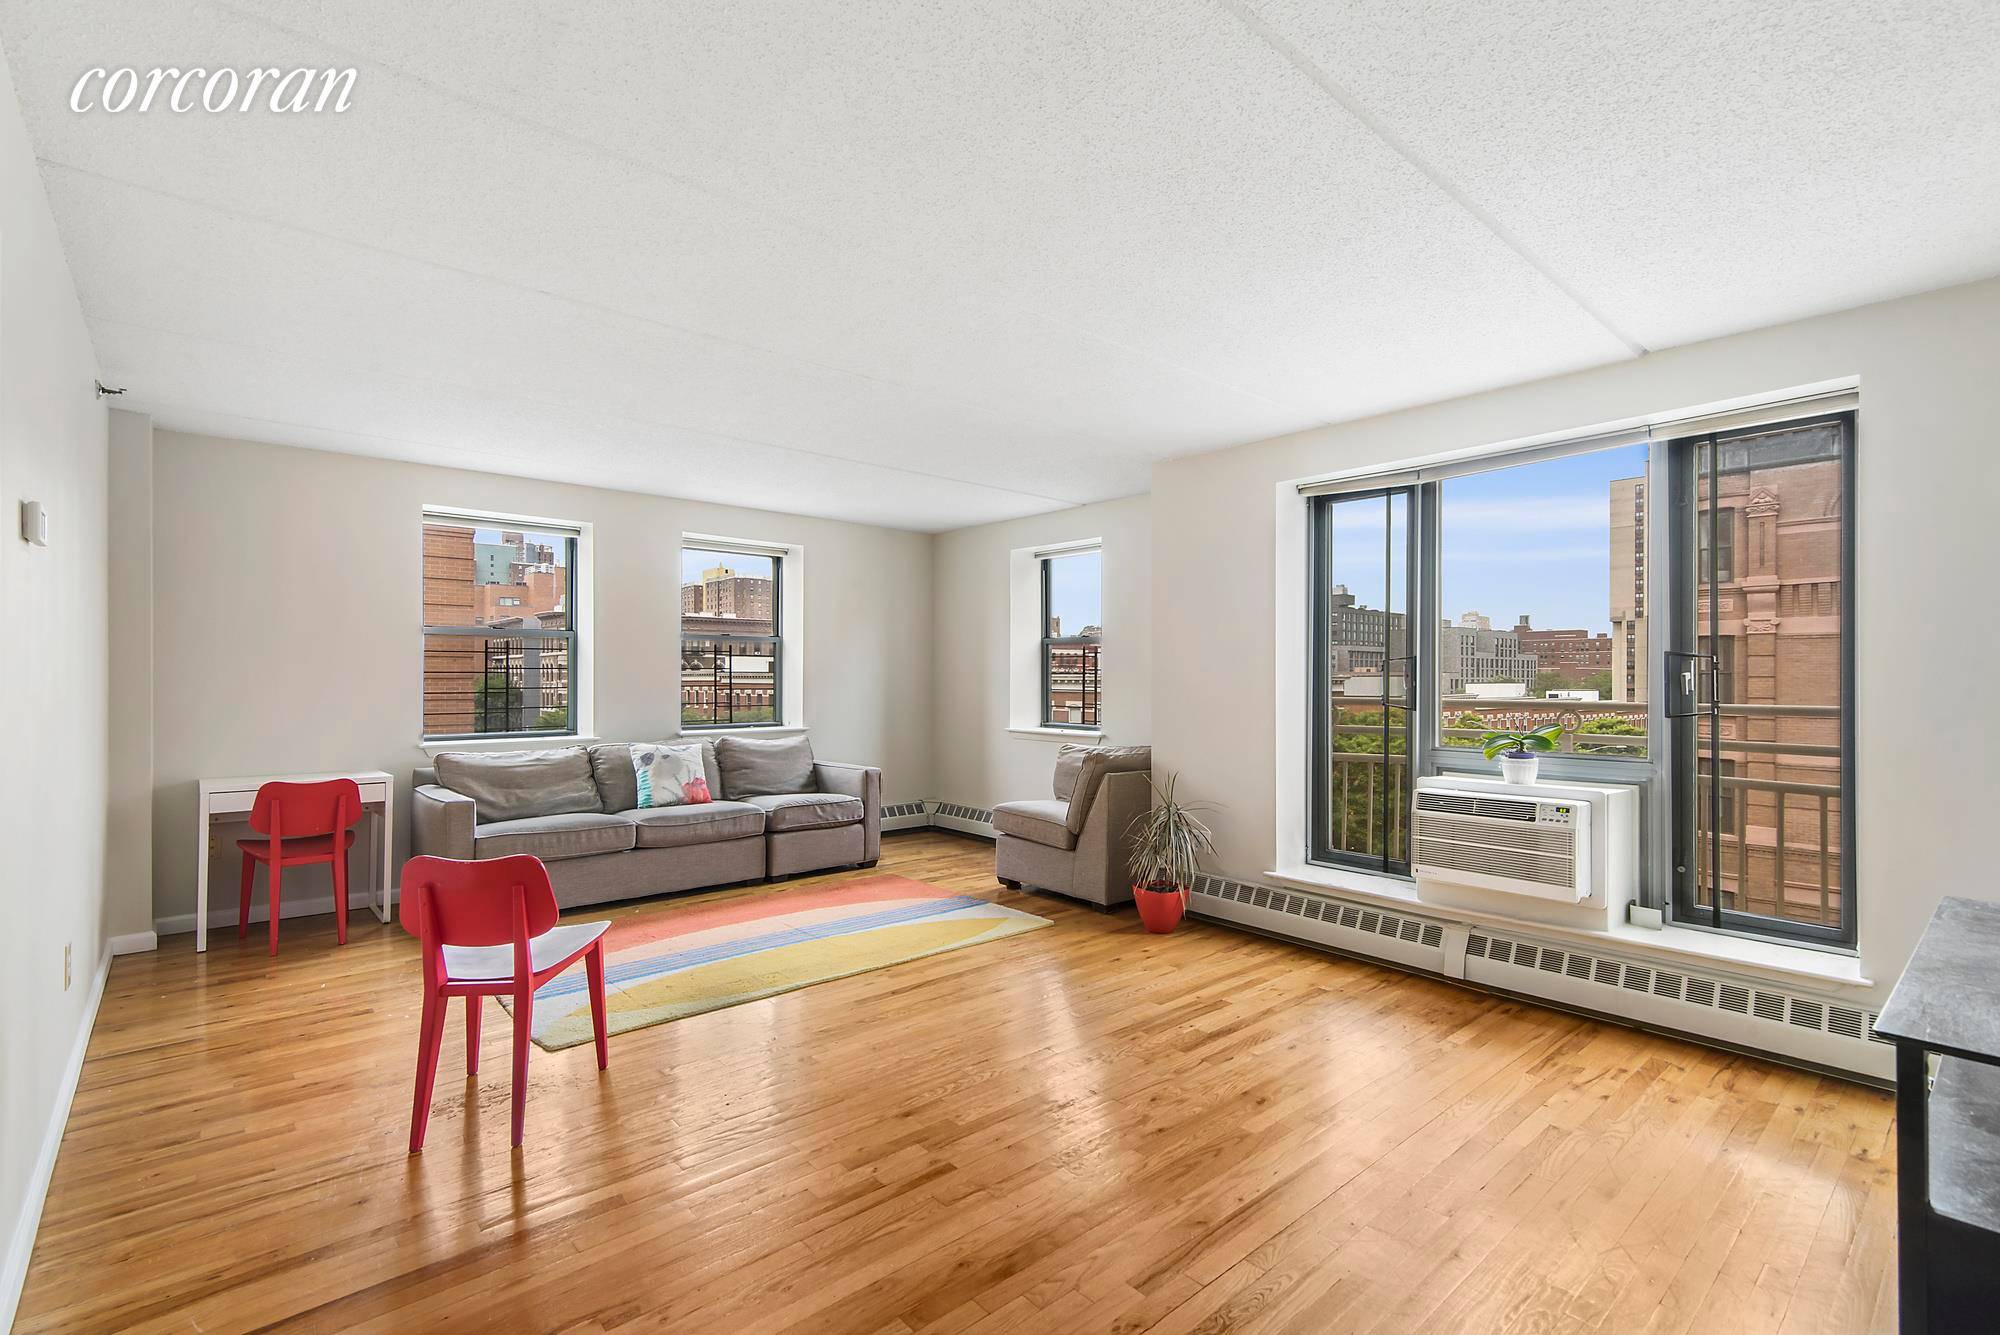 This is it ! A three bedroom, two bath, sun filled apartment with unobstructed views in Manhattan for well under 1M.